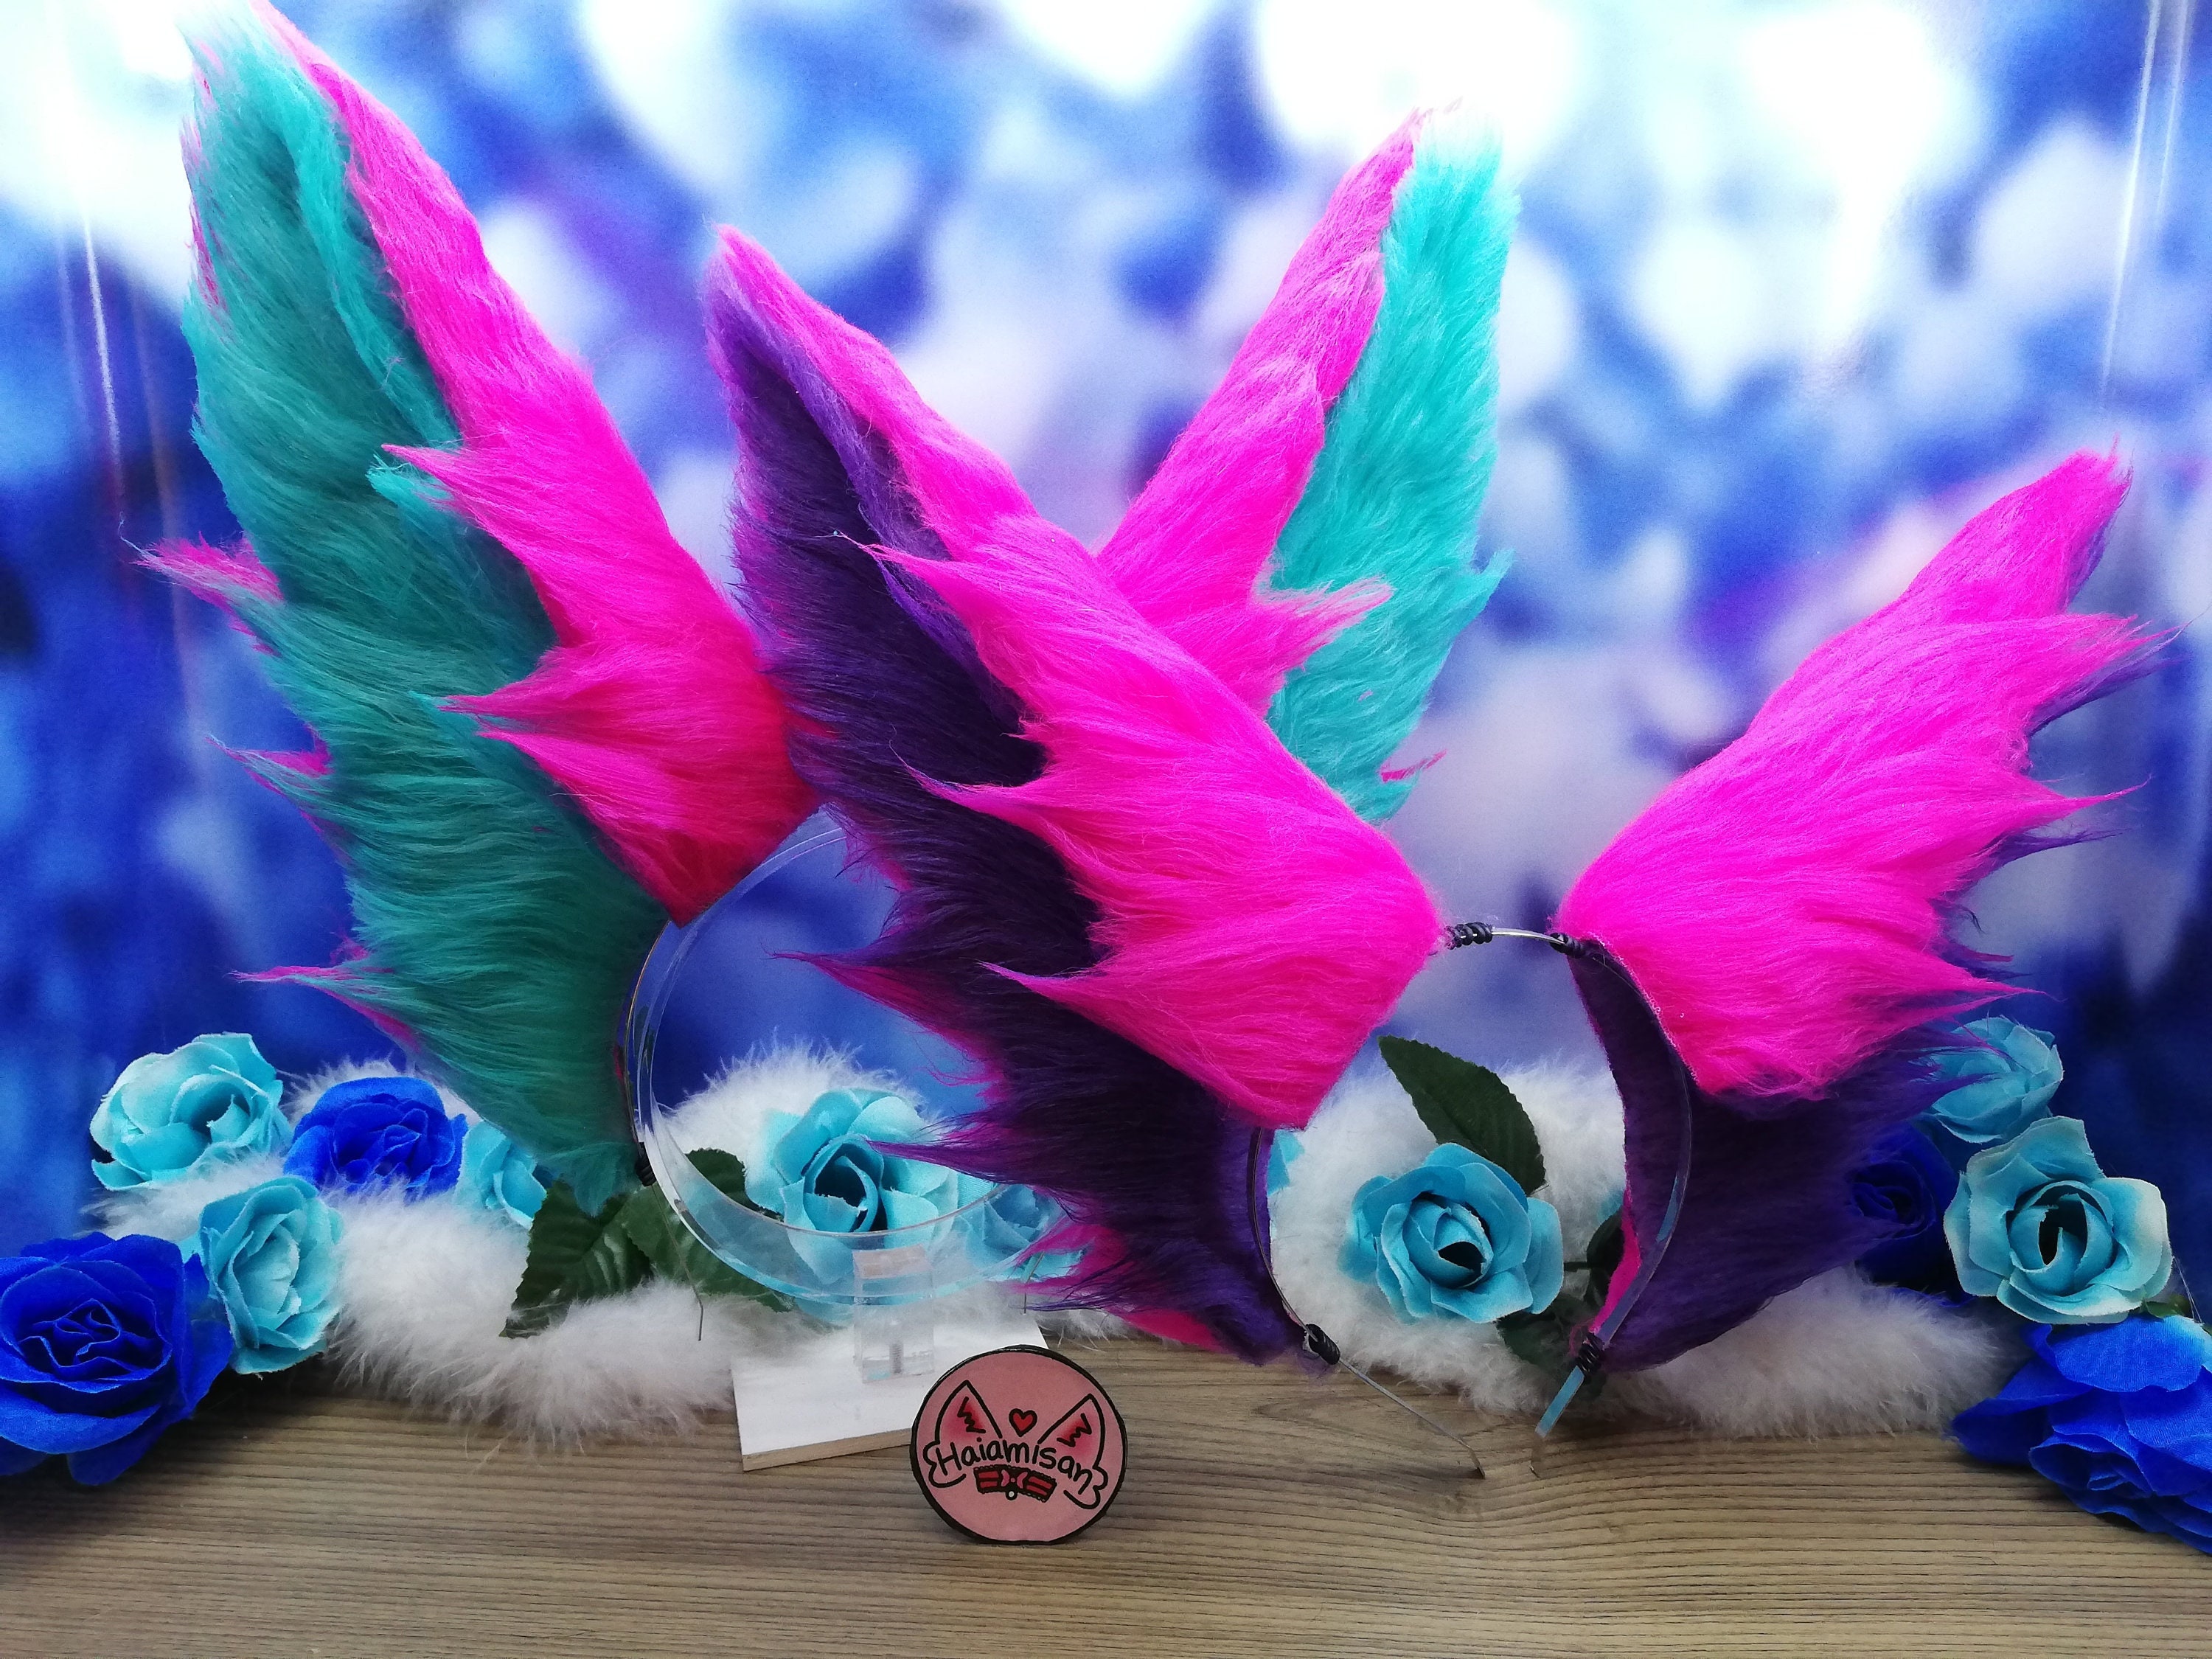 Crafting FAUX FEATHERS for (Starguardian) Xayah cosplay - Sewing tutorial 